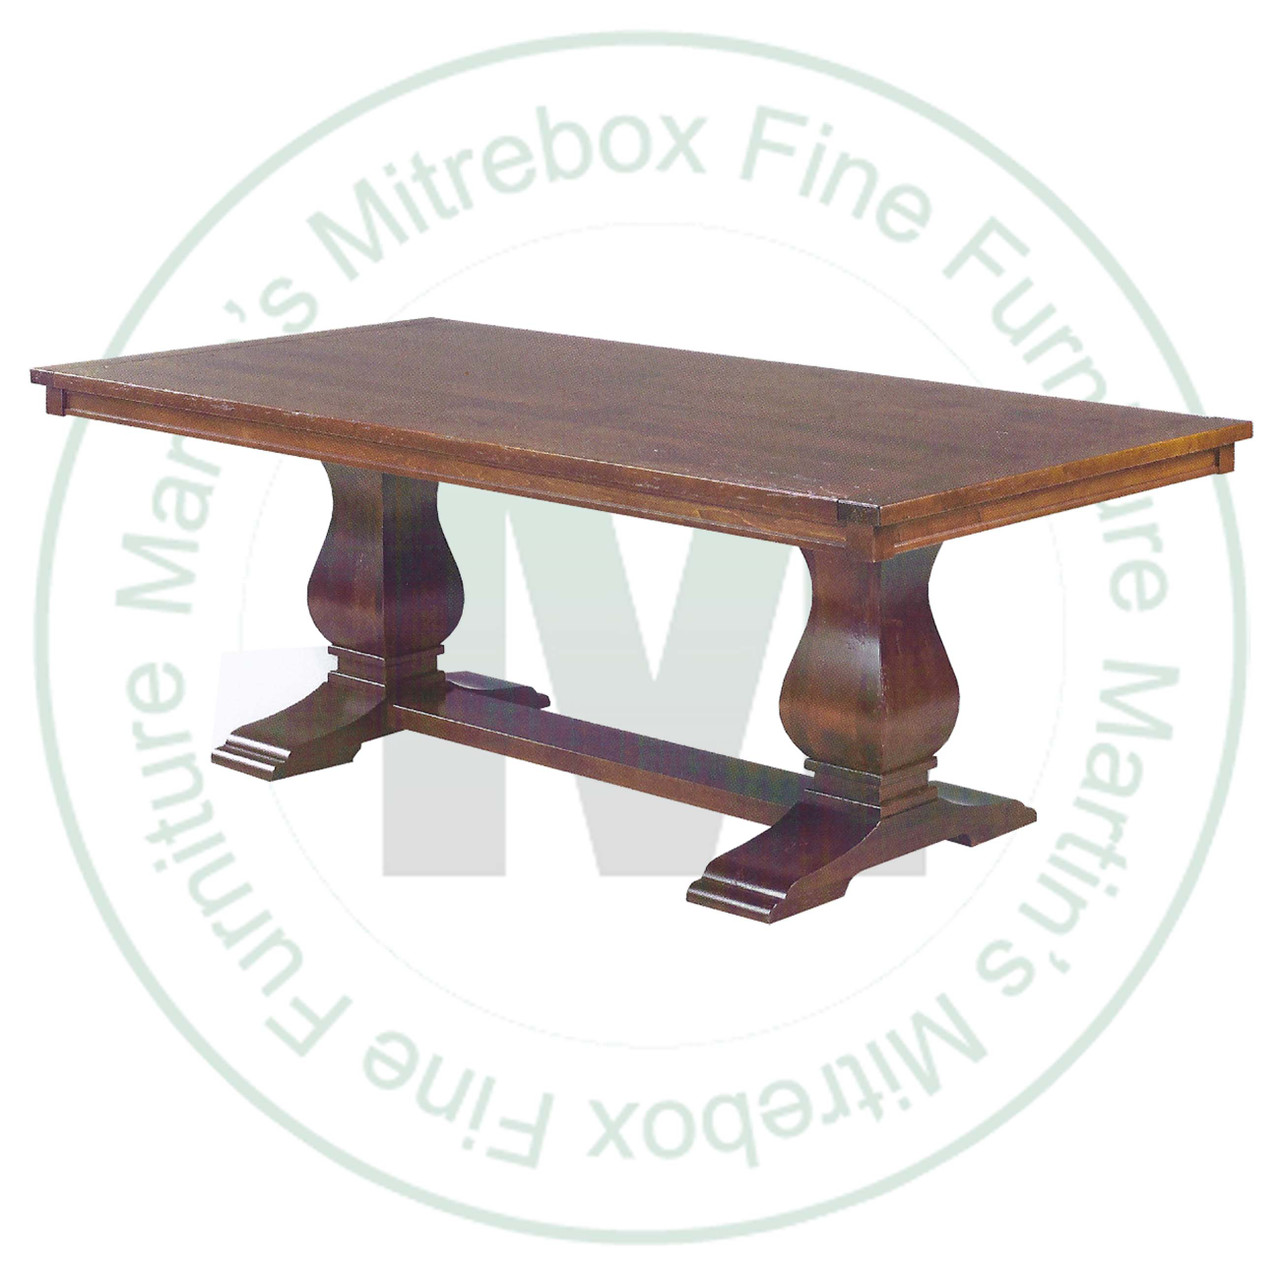 Maple Socrates Solid Top Pedestal Table 48''D x 120''W x 30''H. Table Has 1.25'' Thick Top